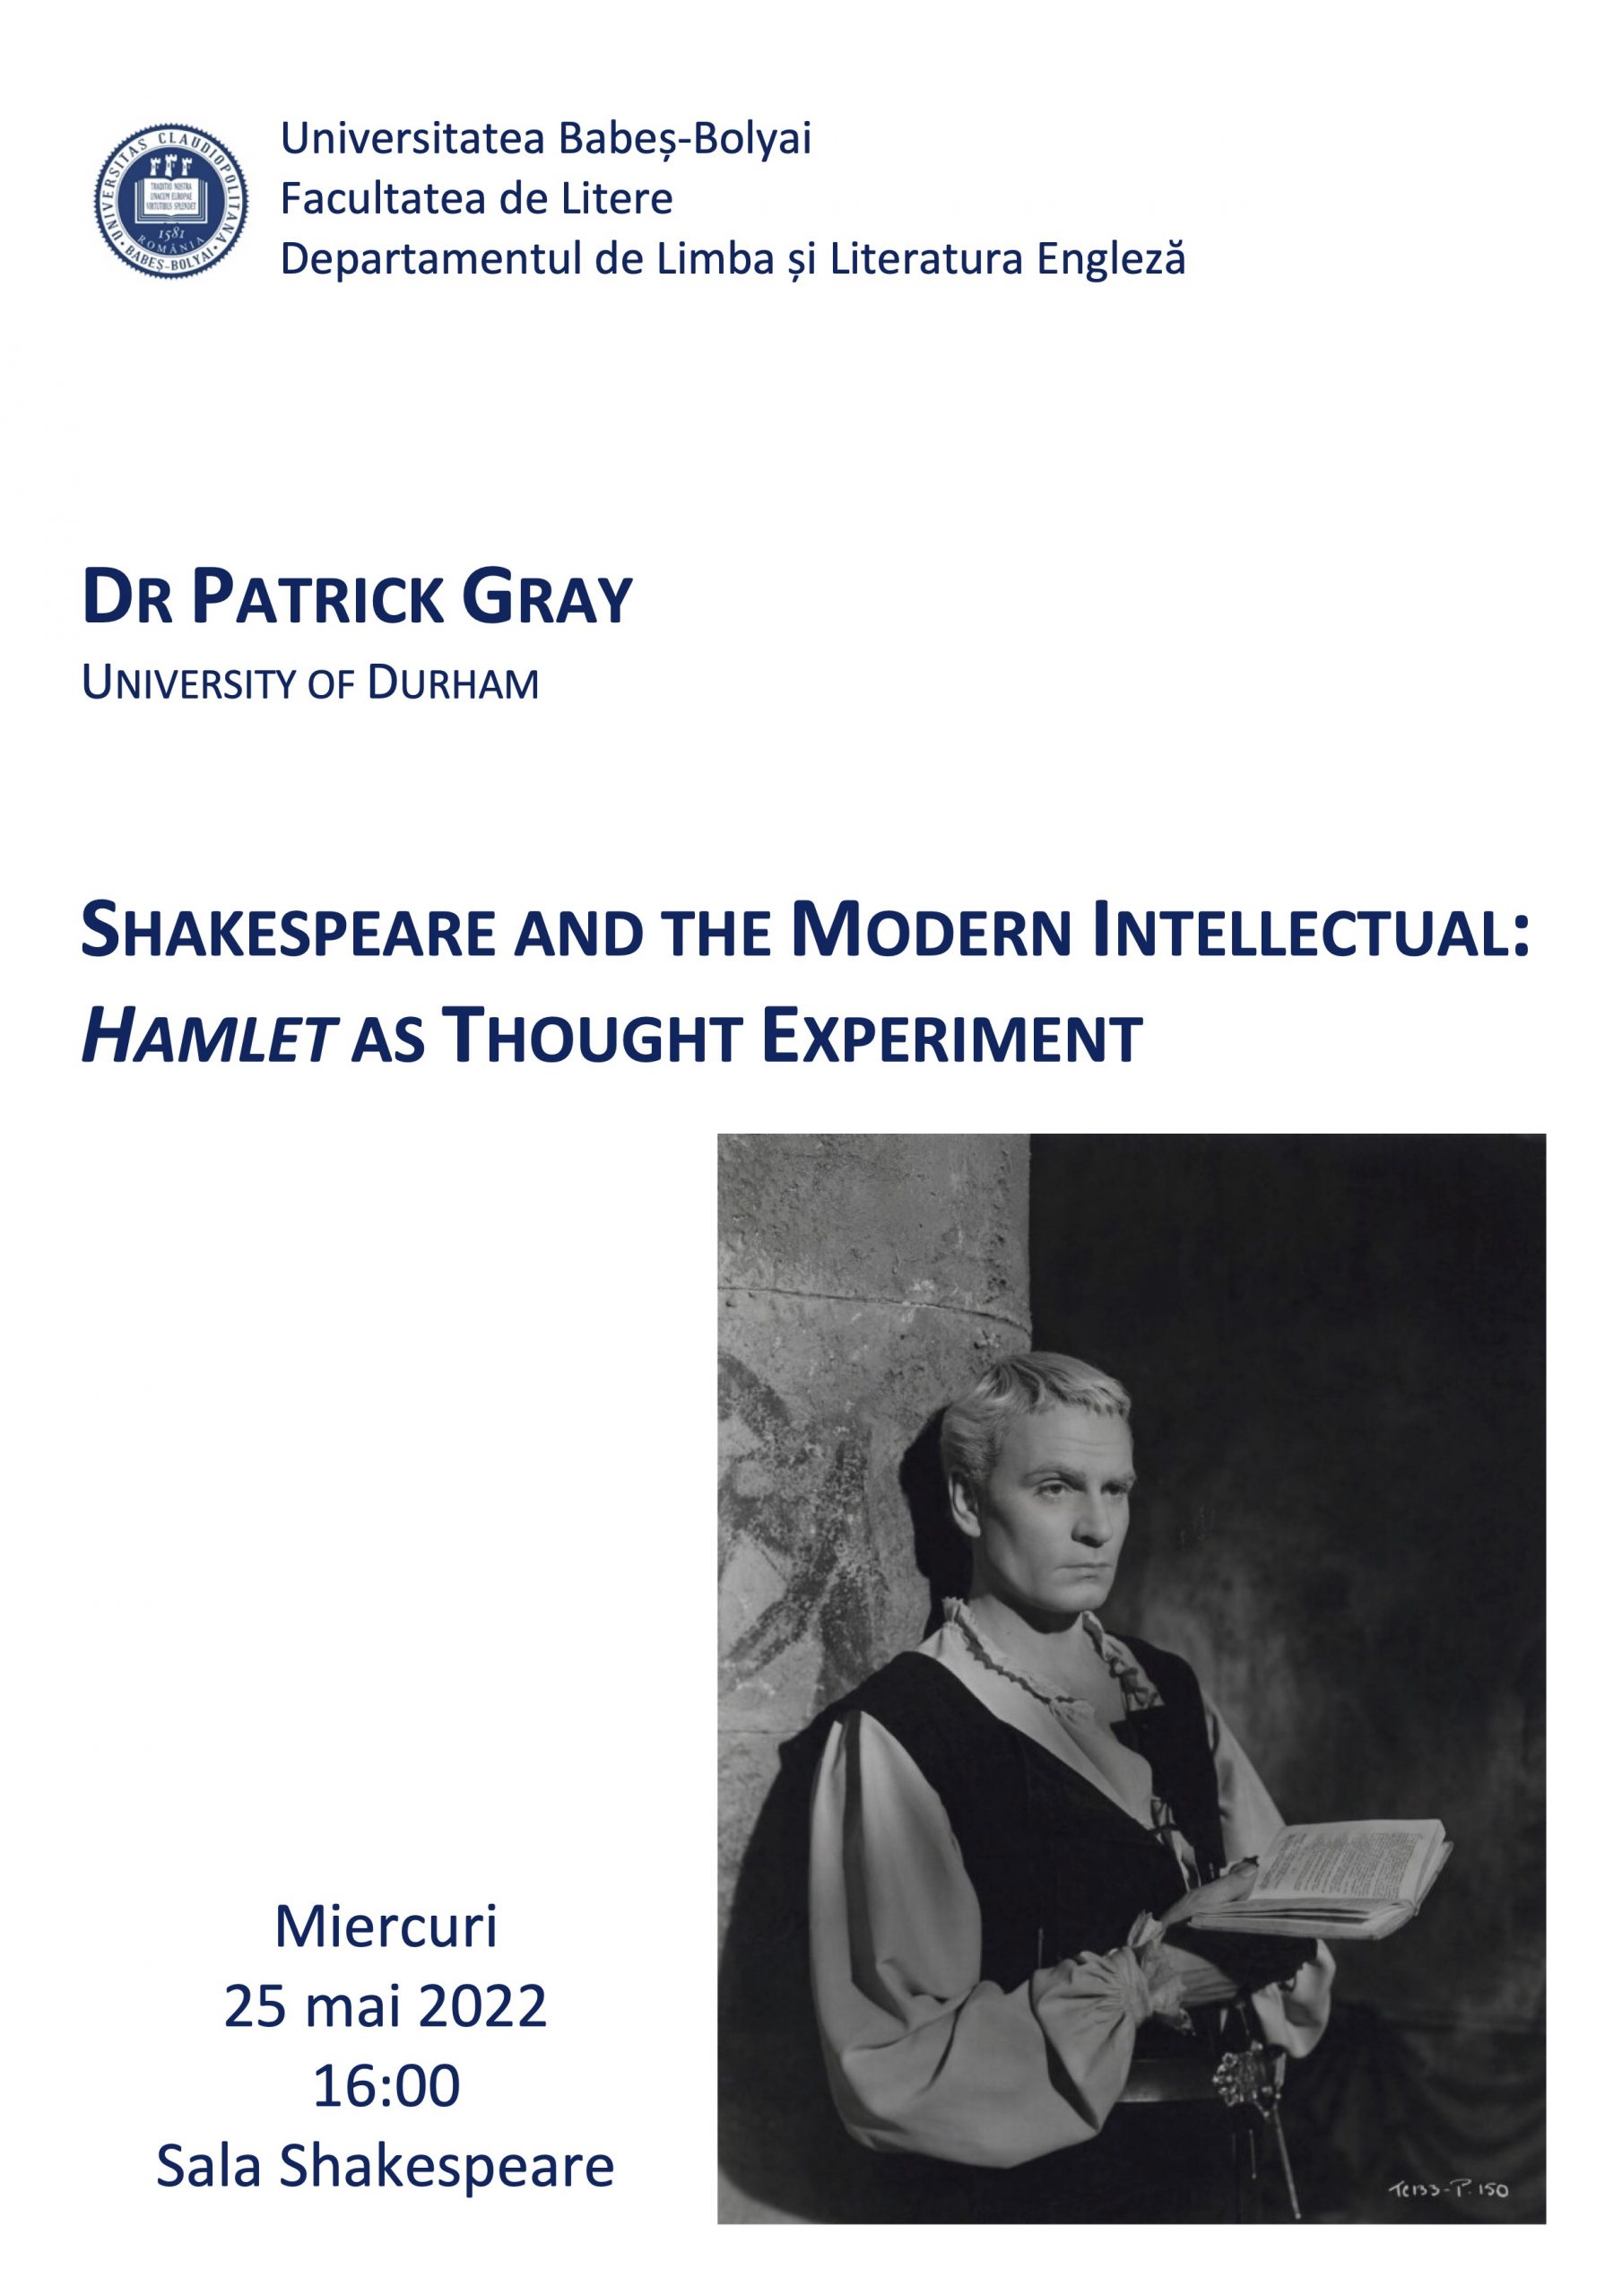 Shakespeare and the Modern Intellectual: Hamlet as Thought Experiment